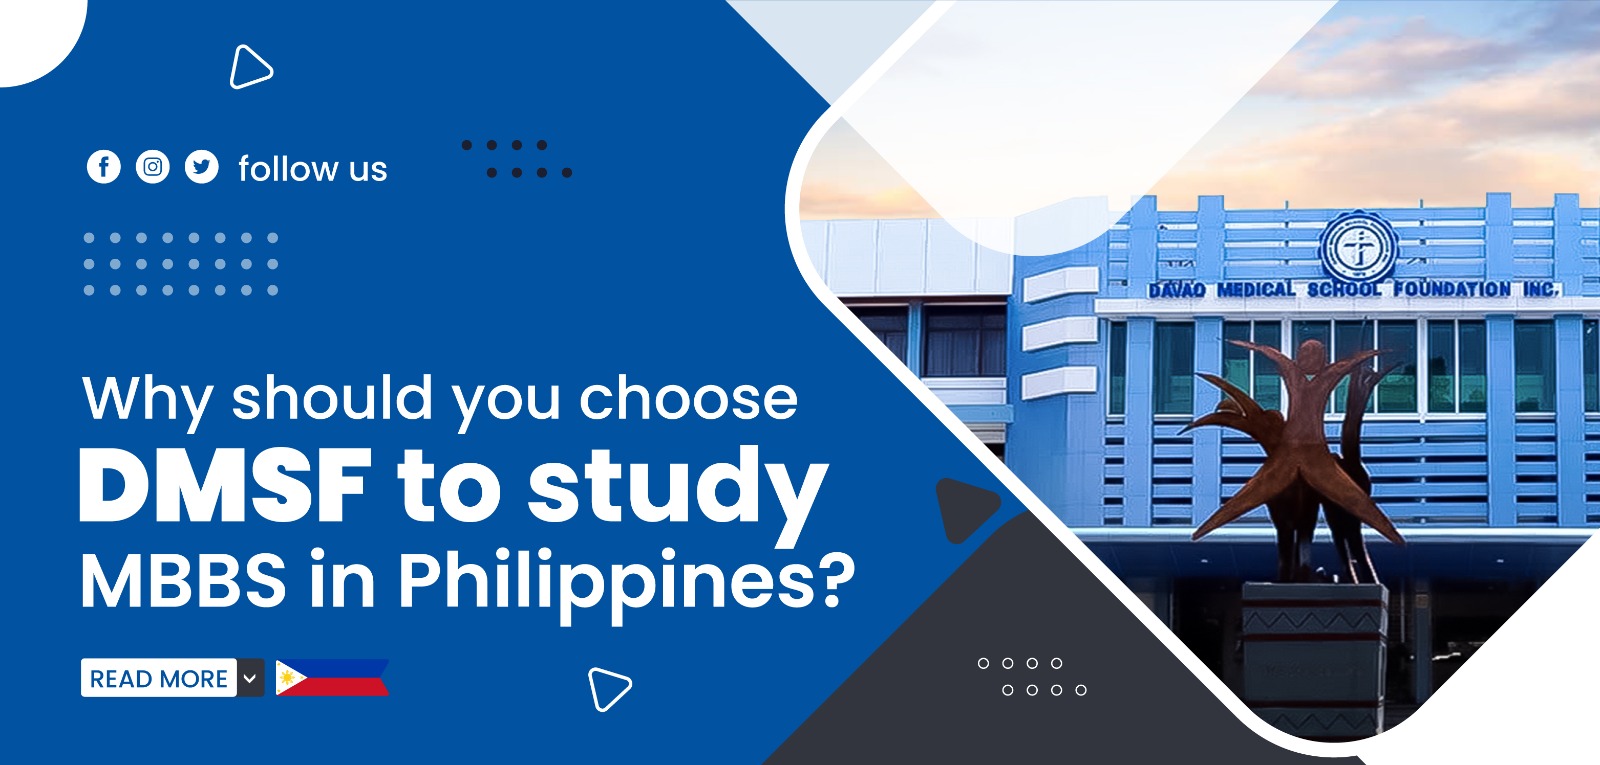 Why should you choose DMSF to study MBBS in Philippines?